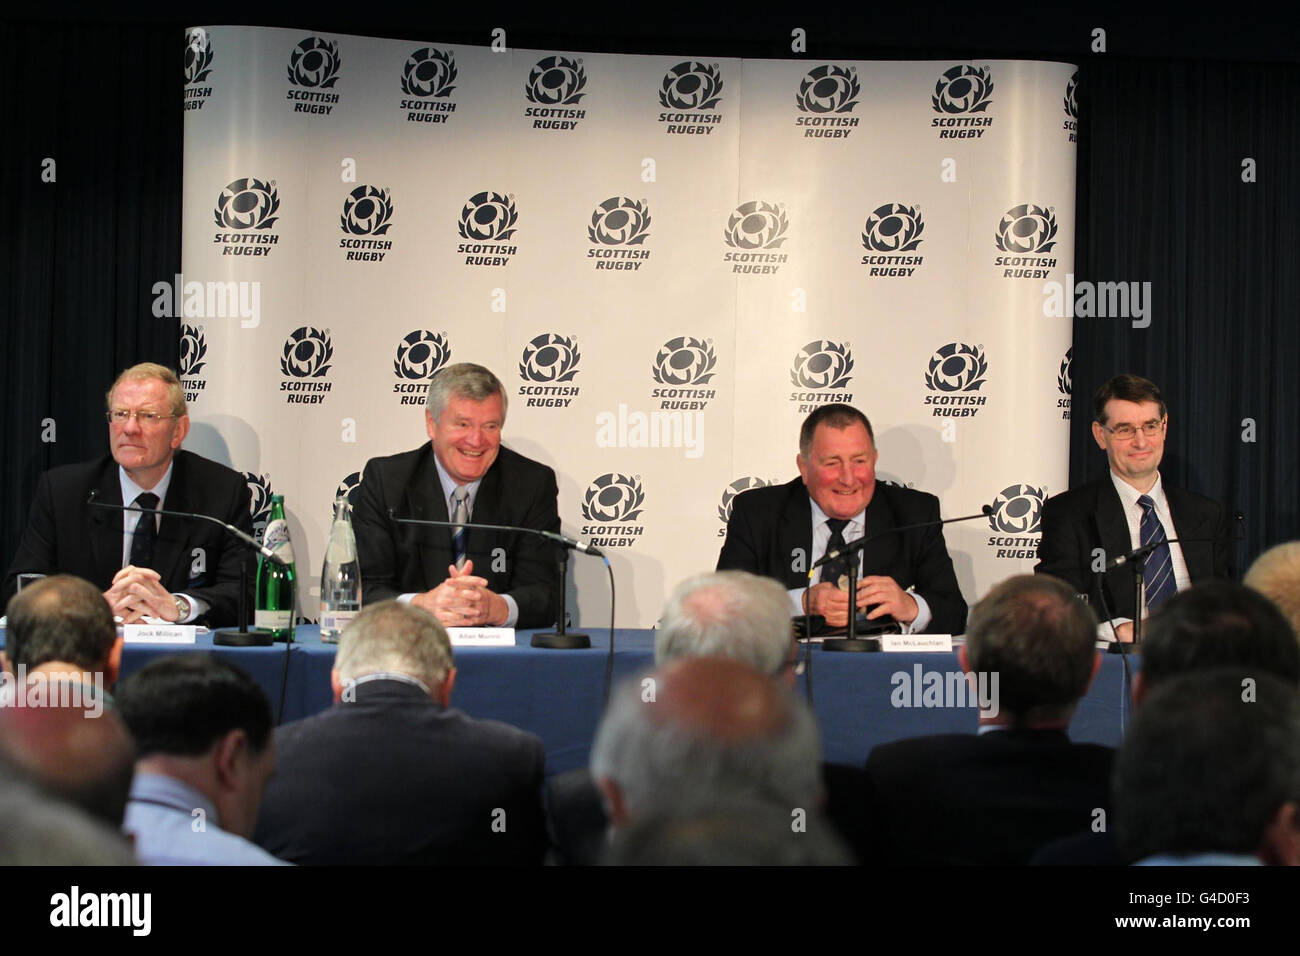 Scottish Rugby Union members Jock Millican (Non-Executive Director and Chief Executive), Allan Munro (Chairman), Ian McLauchlan (president) and Graham Ireland (Union/Company Secretary and Head of Legal & Governance) during the Scottish Rugby Union AGM at Murrayfield, Edinburgh. Stock Photo